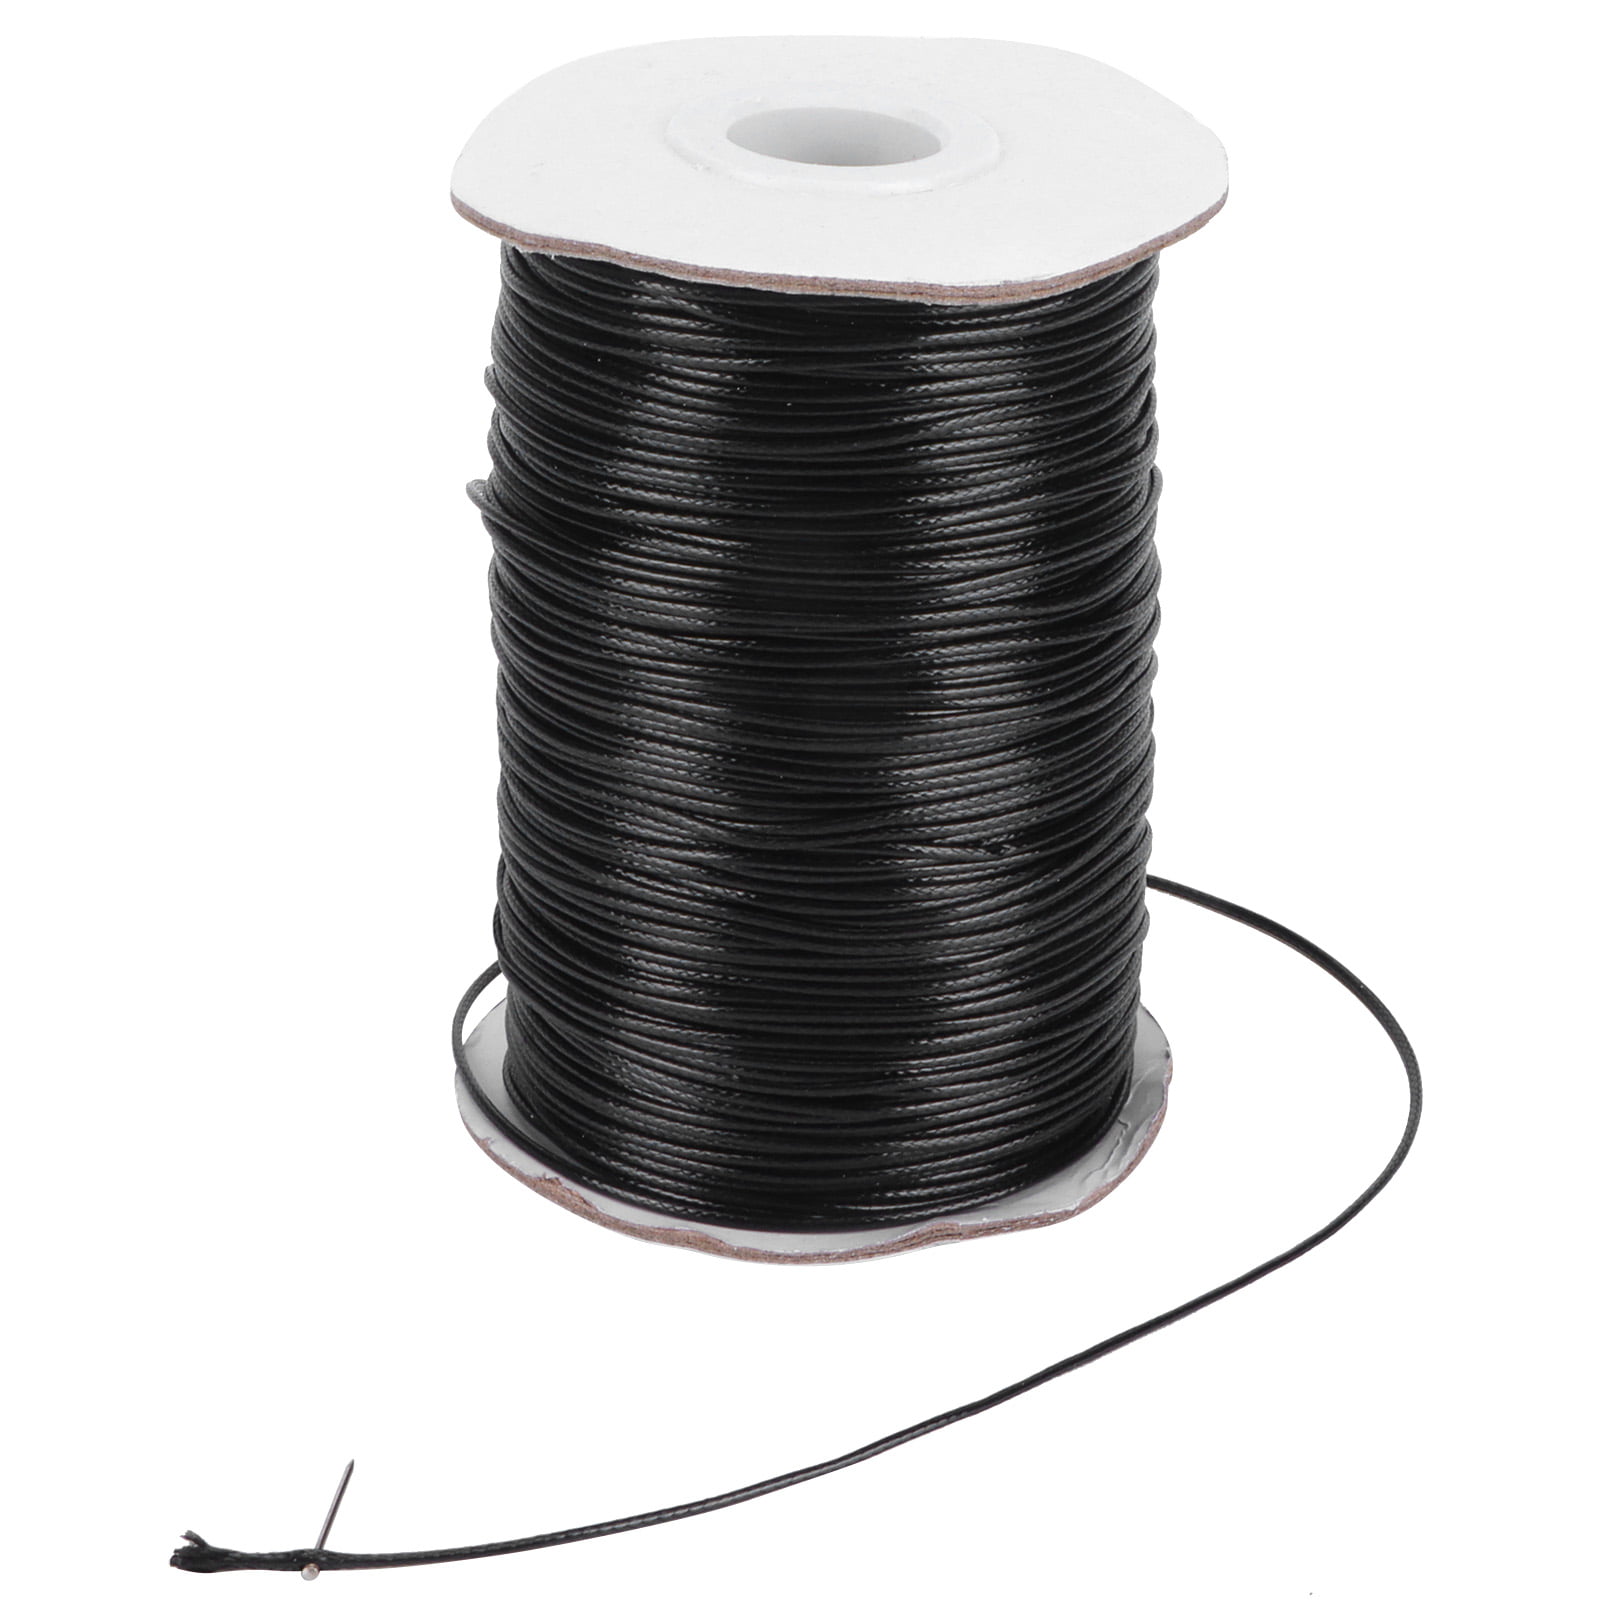 10m waxed polyester thread twisted 1.5mm black